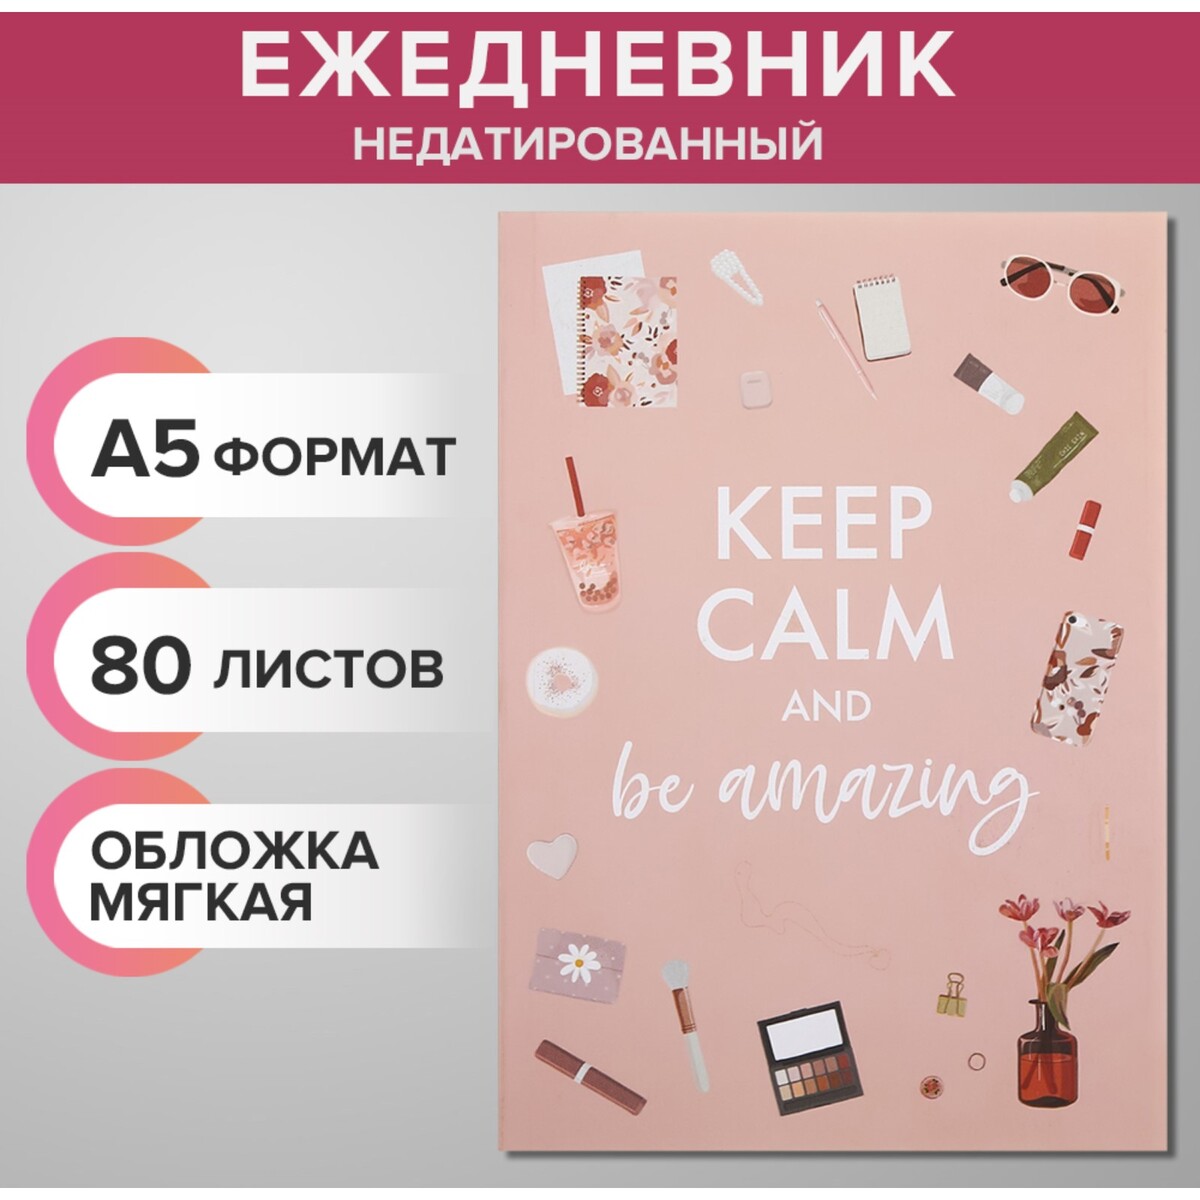 Ежедневник недатированный на склейке а5 80 листов, мягкая обложка keep calm and be amazing a5 creative hardcover 365 days notebook 192sheets blank pages schedule planning keep a diary record office study notes supplies